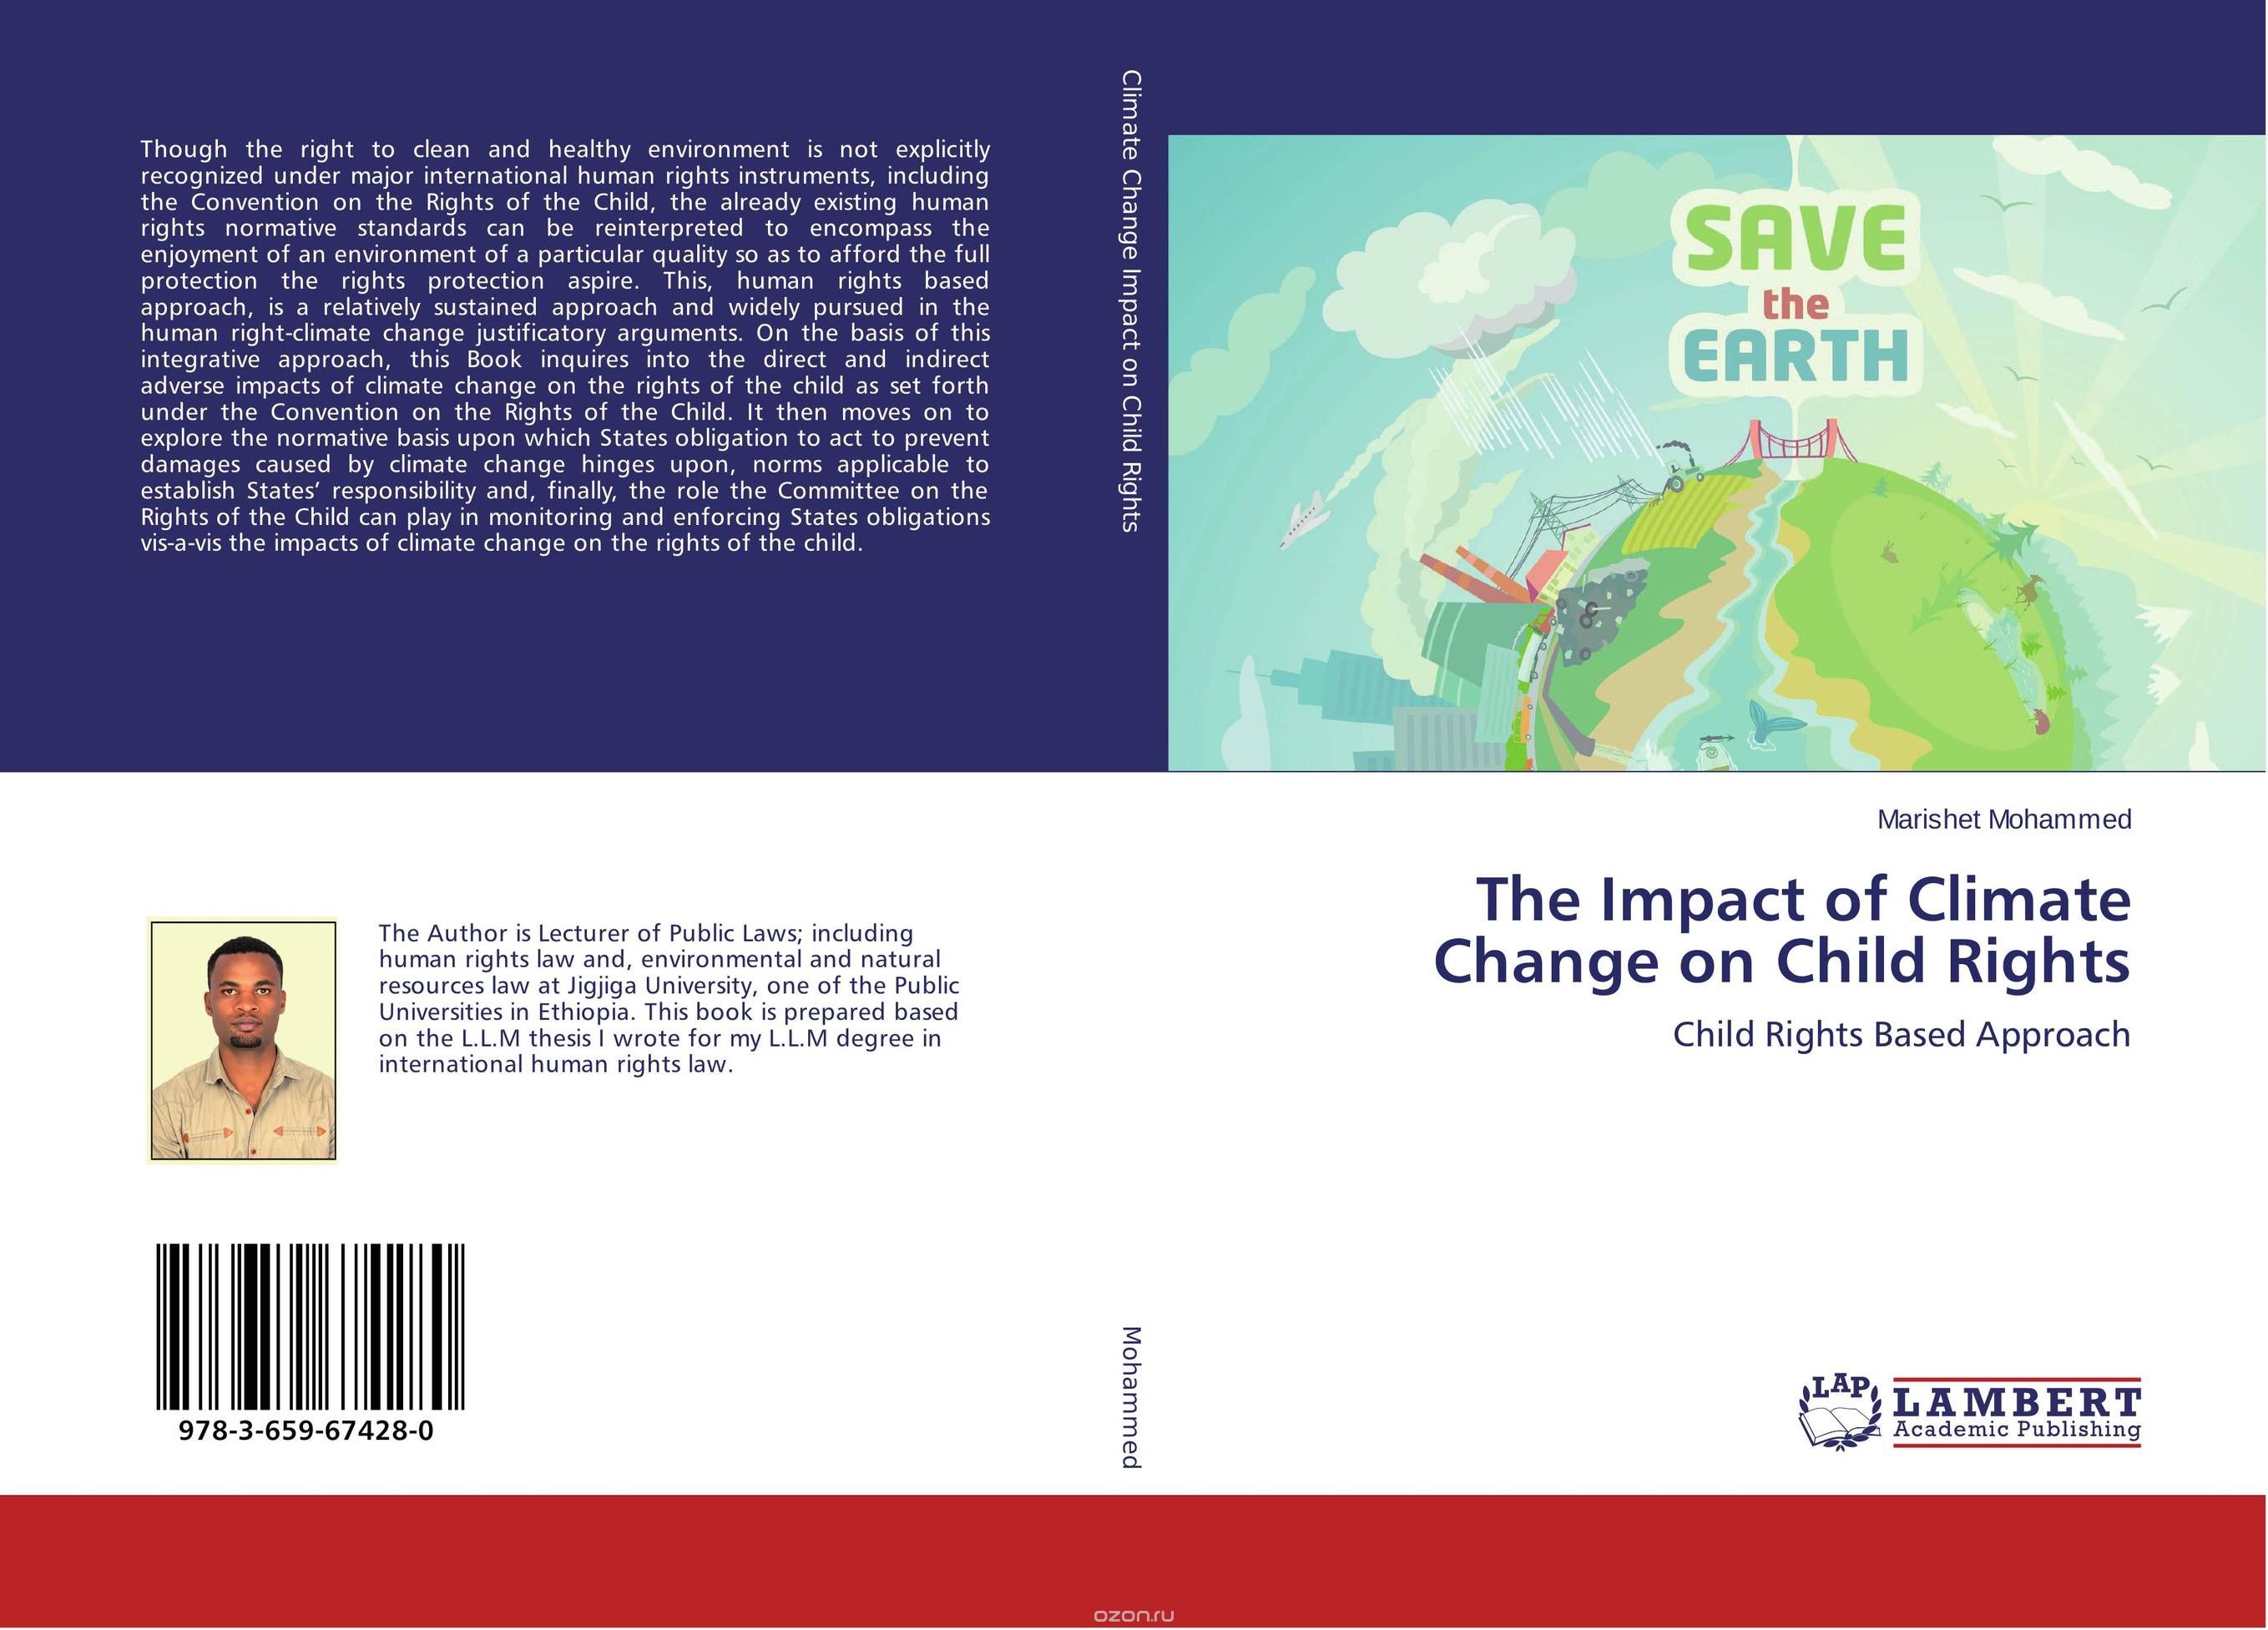 The Impact of Climate Change on Child Rights